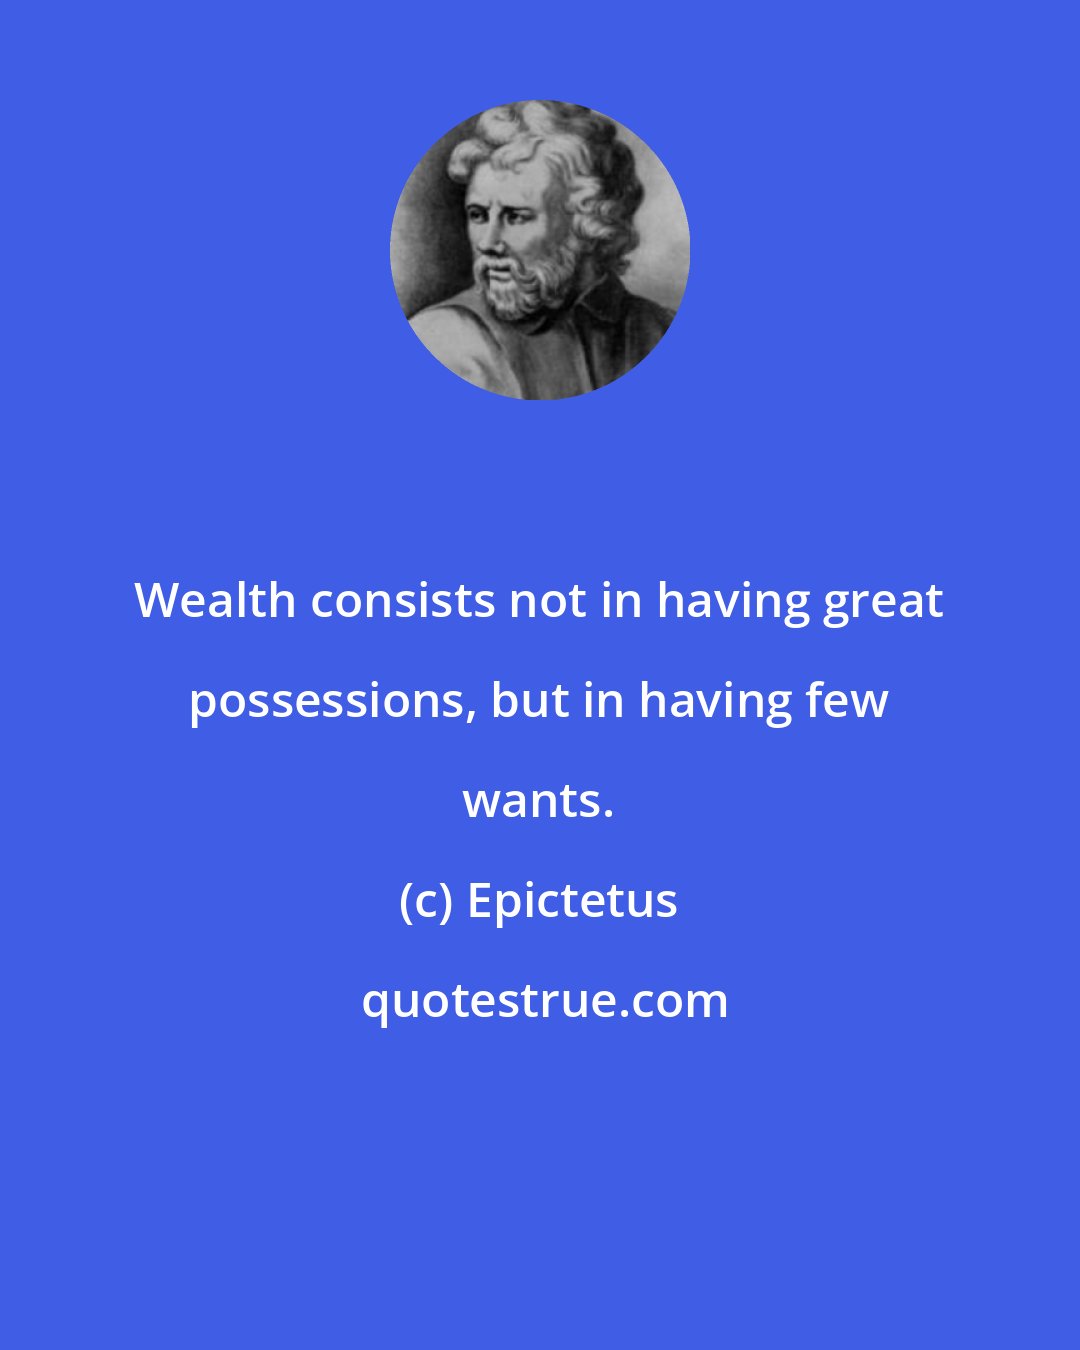 Epictetus: Wealth consists not in having great possessions, but in having few wants.